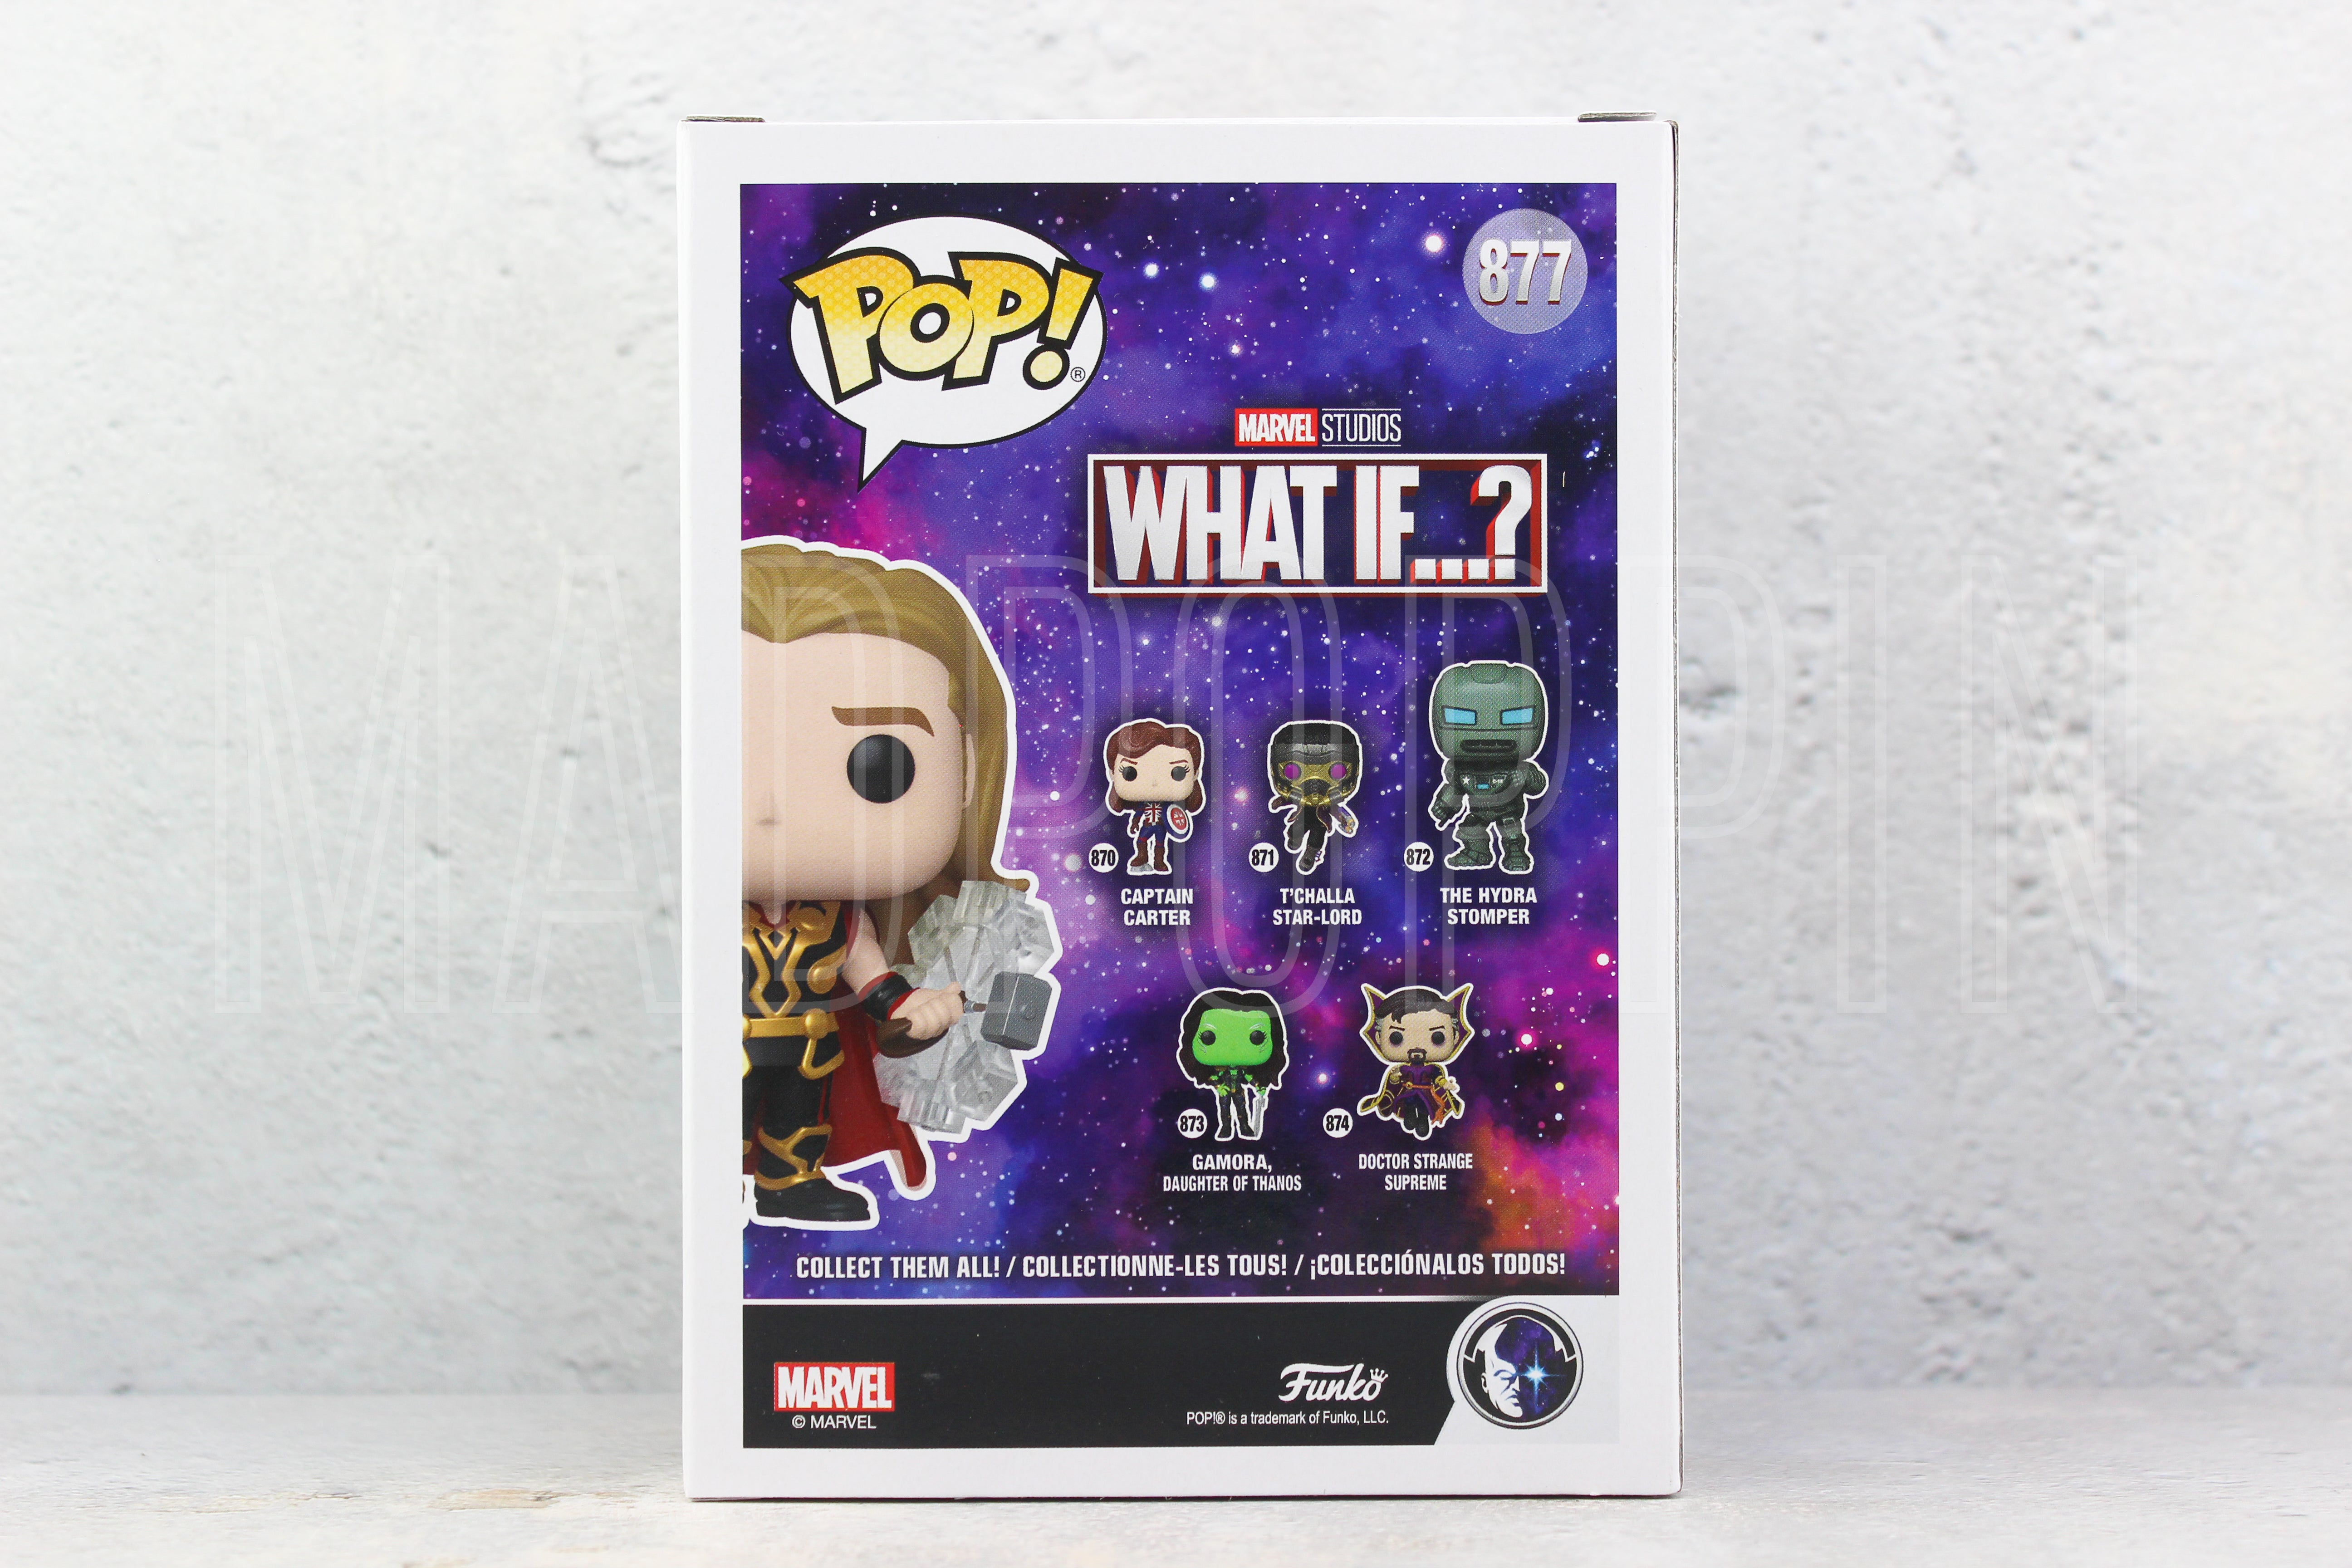 POP! Marvel: Marvel Studios: What If...? - Party Thor